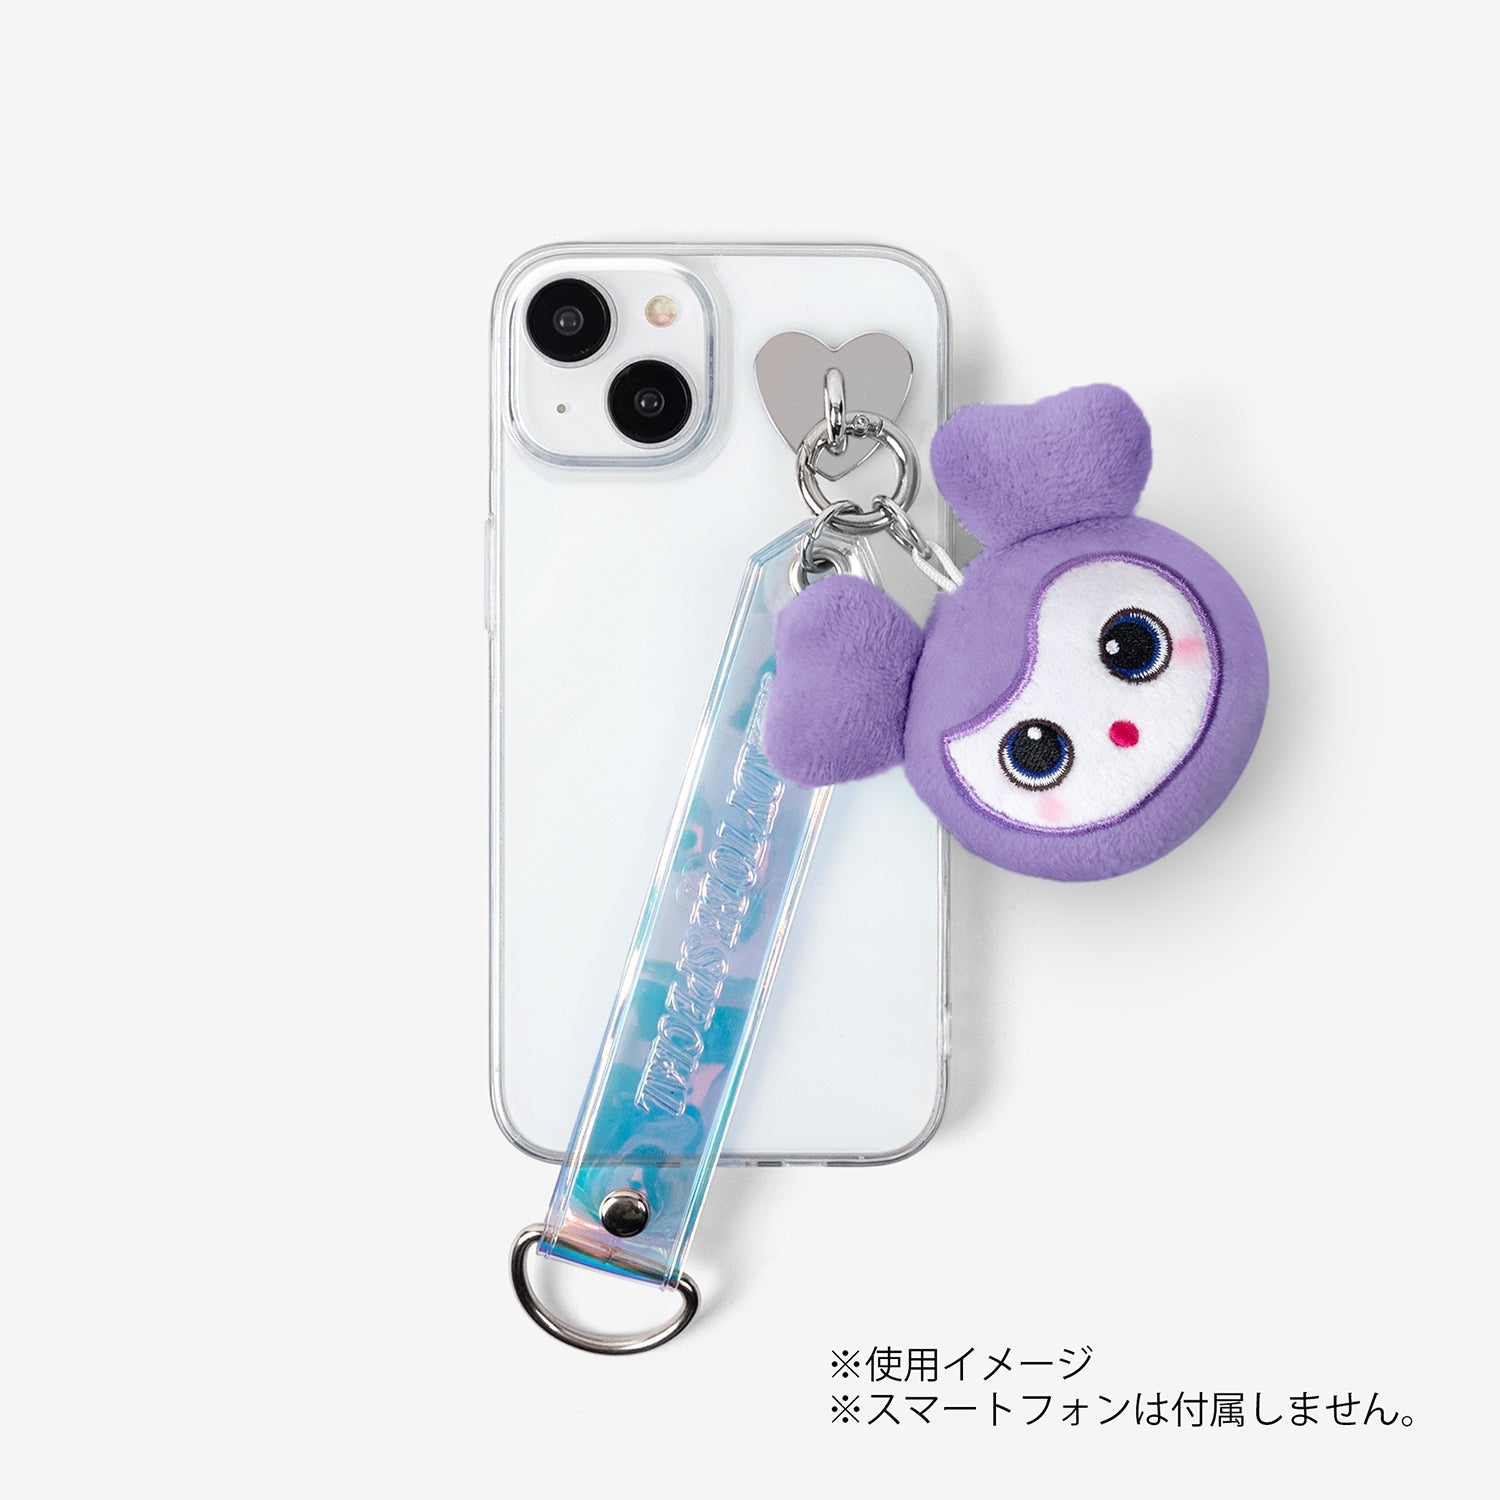 BABY LOVELYS SMARTPHONE CHARM STRAP - BABY SAVELY / TWICE『READY TO BE SPECIAL』